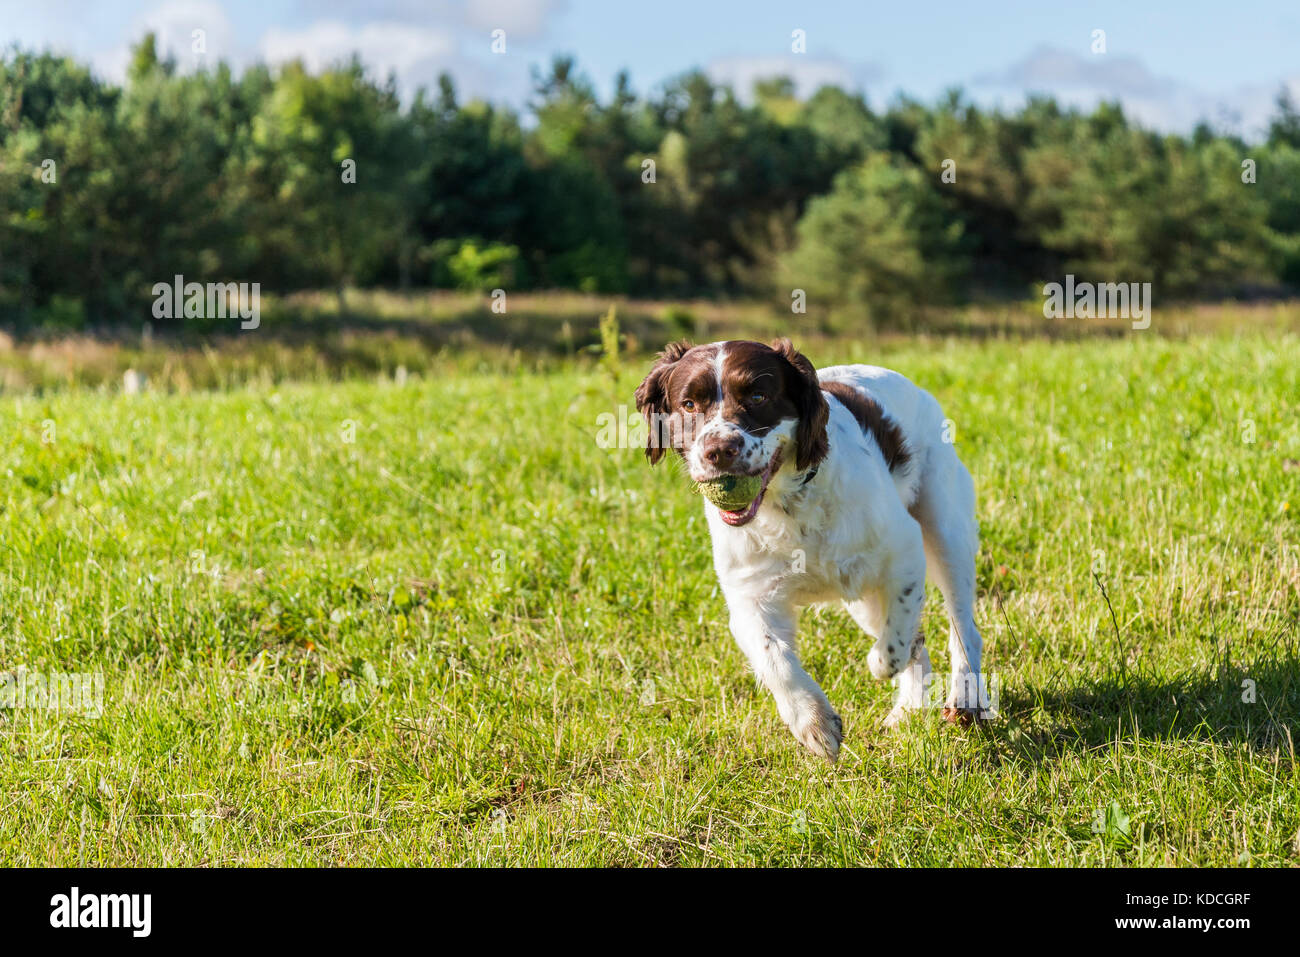 English springer spaniel running over grass with tennis ball in mouth Stock Photo